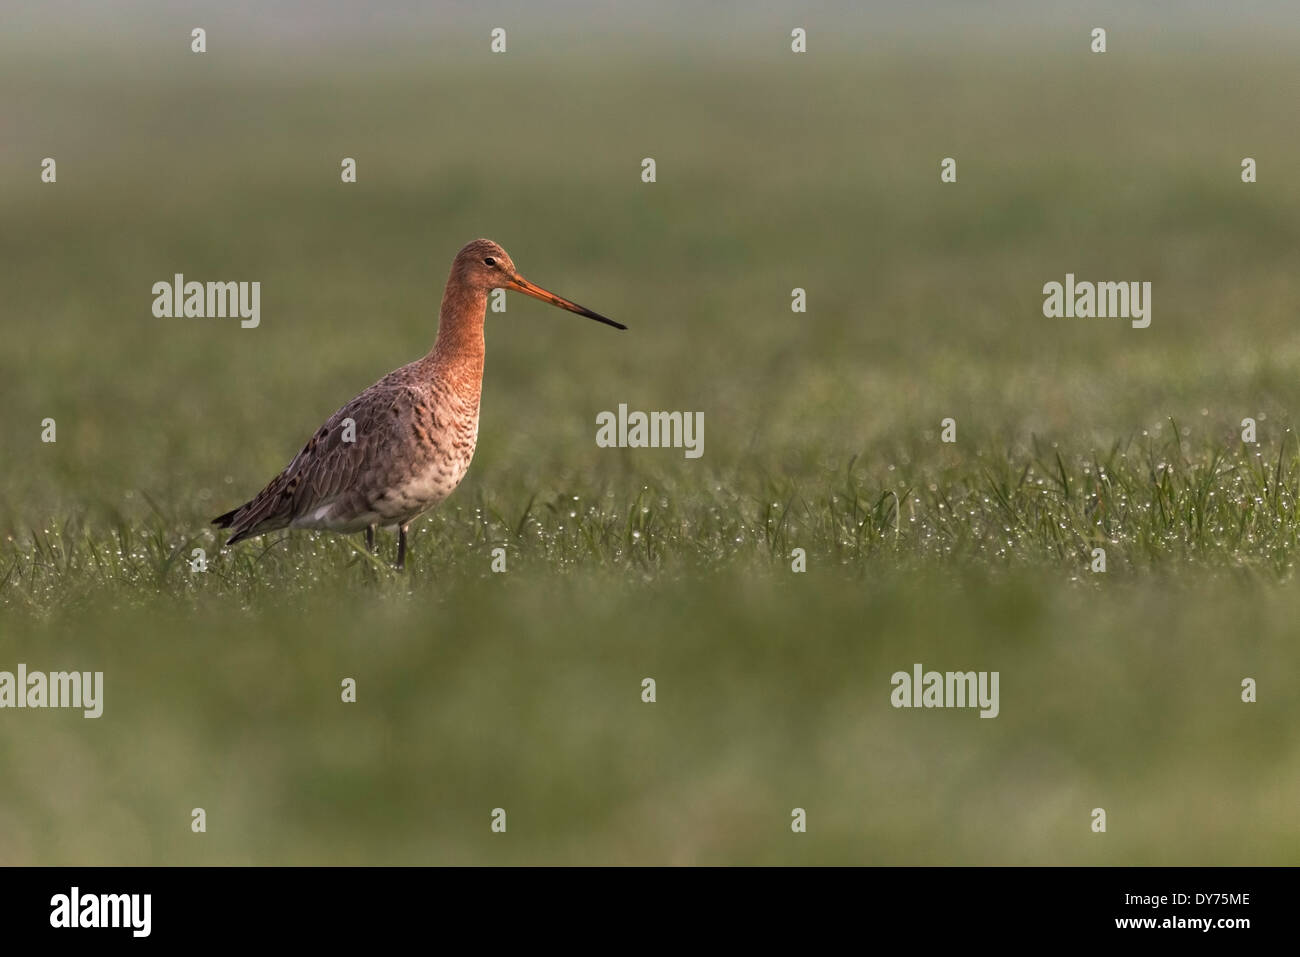 Black-tailed godwit foraging on a field near a dutch farm. A low point of view at eye level. Stock Photo